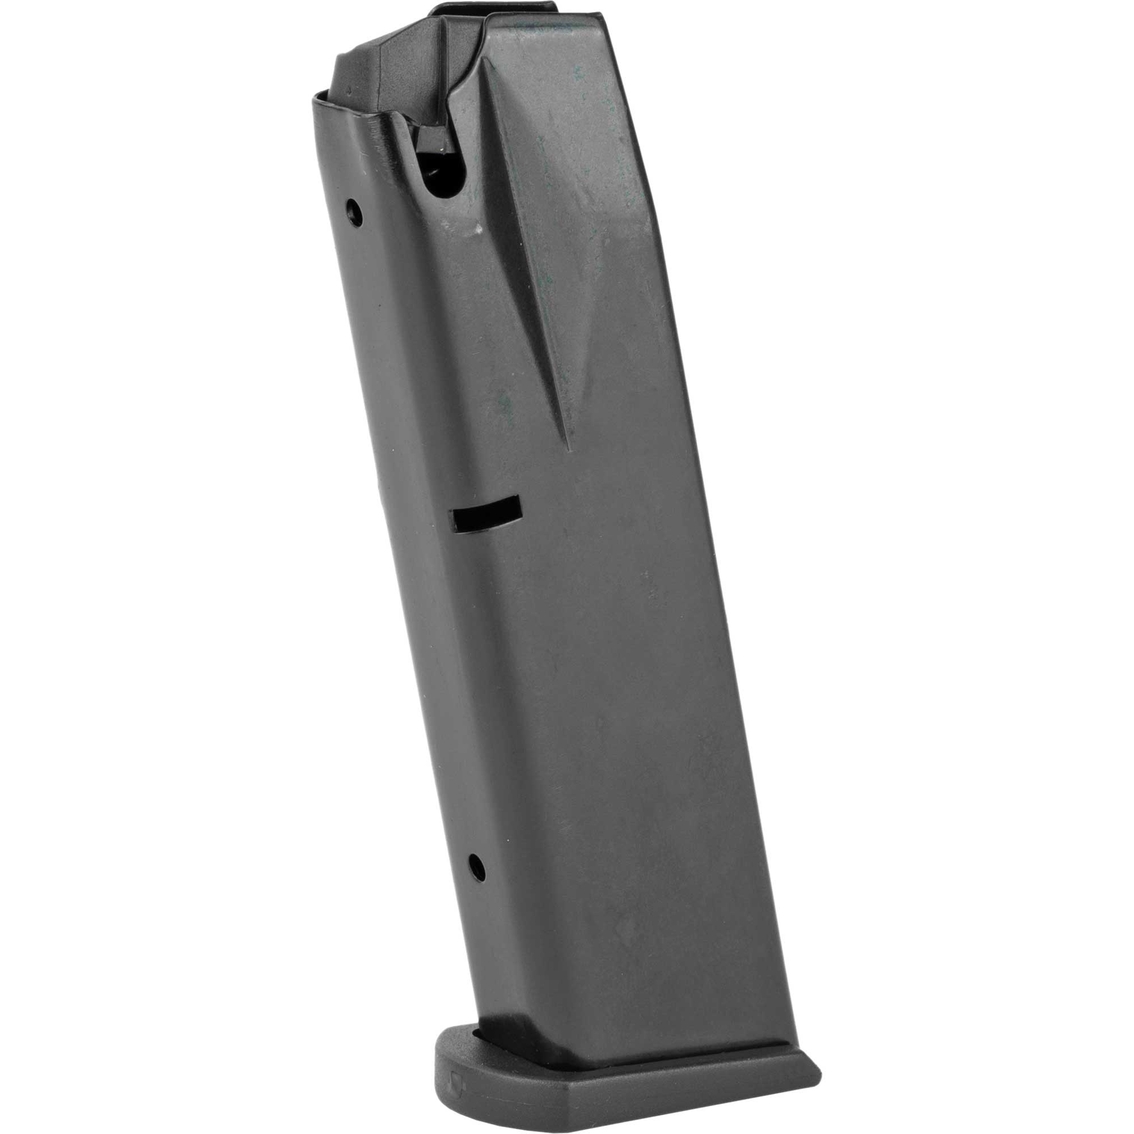 ProMag 9mm Magazine, Fits Beretta 92F, 17 Rds., Blued - Image 1 of 2